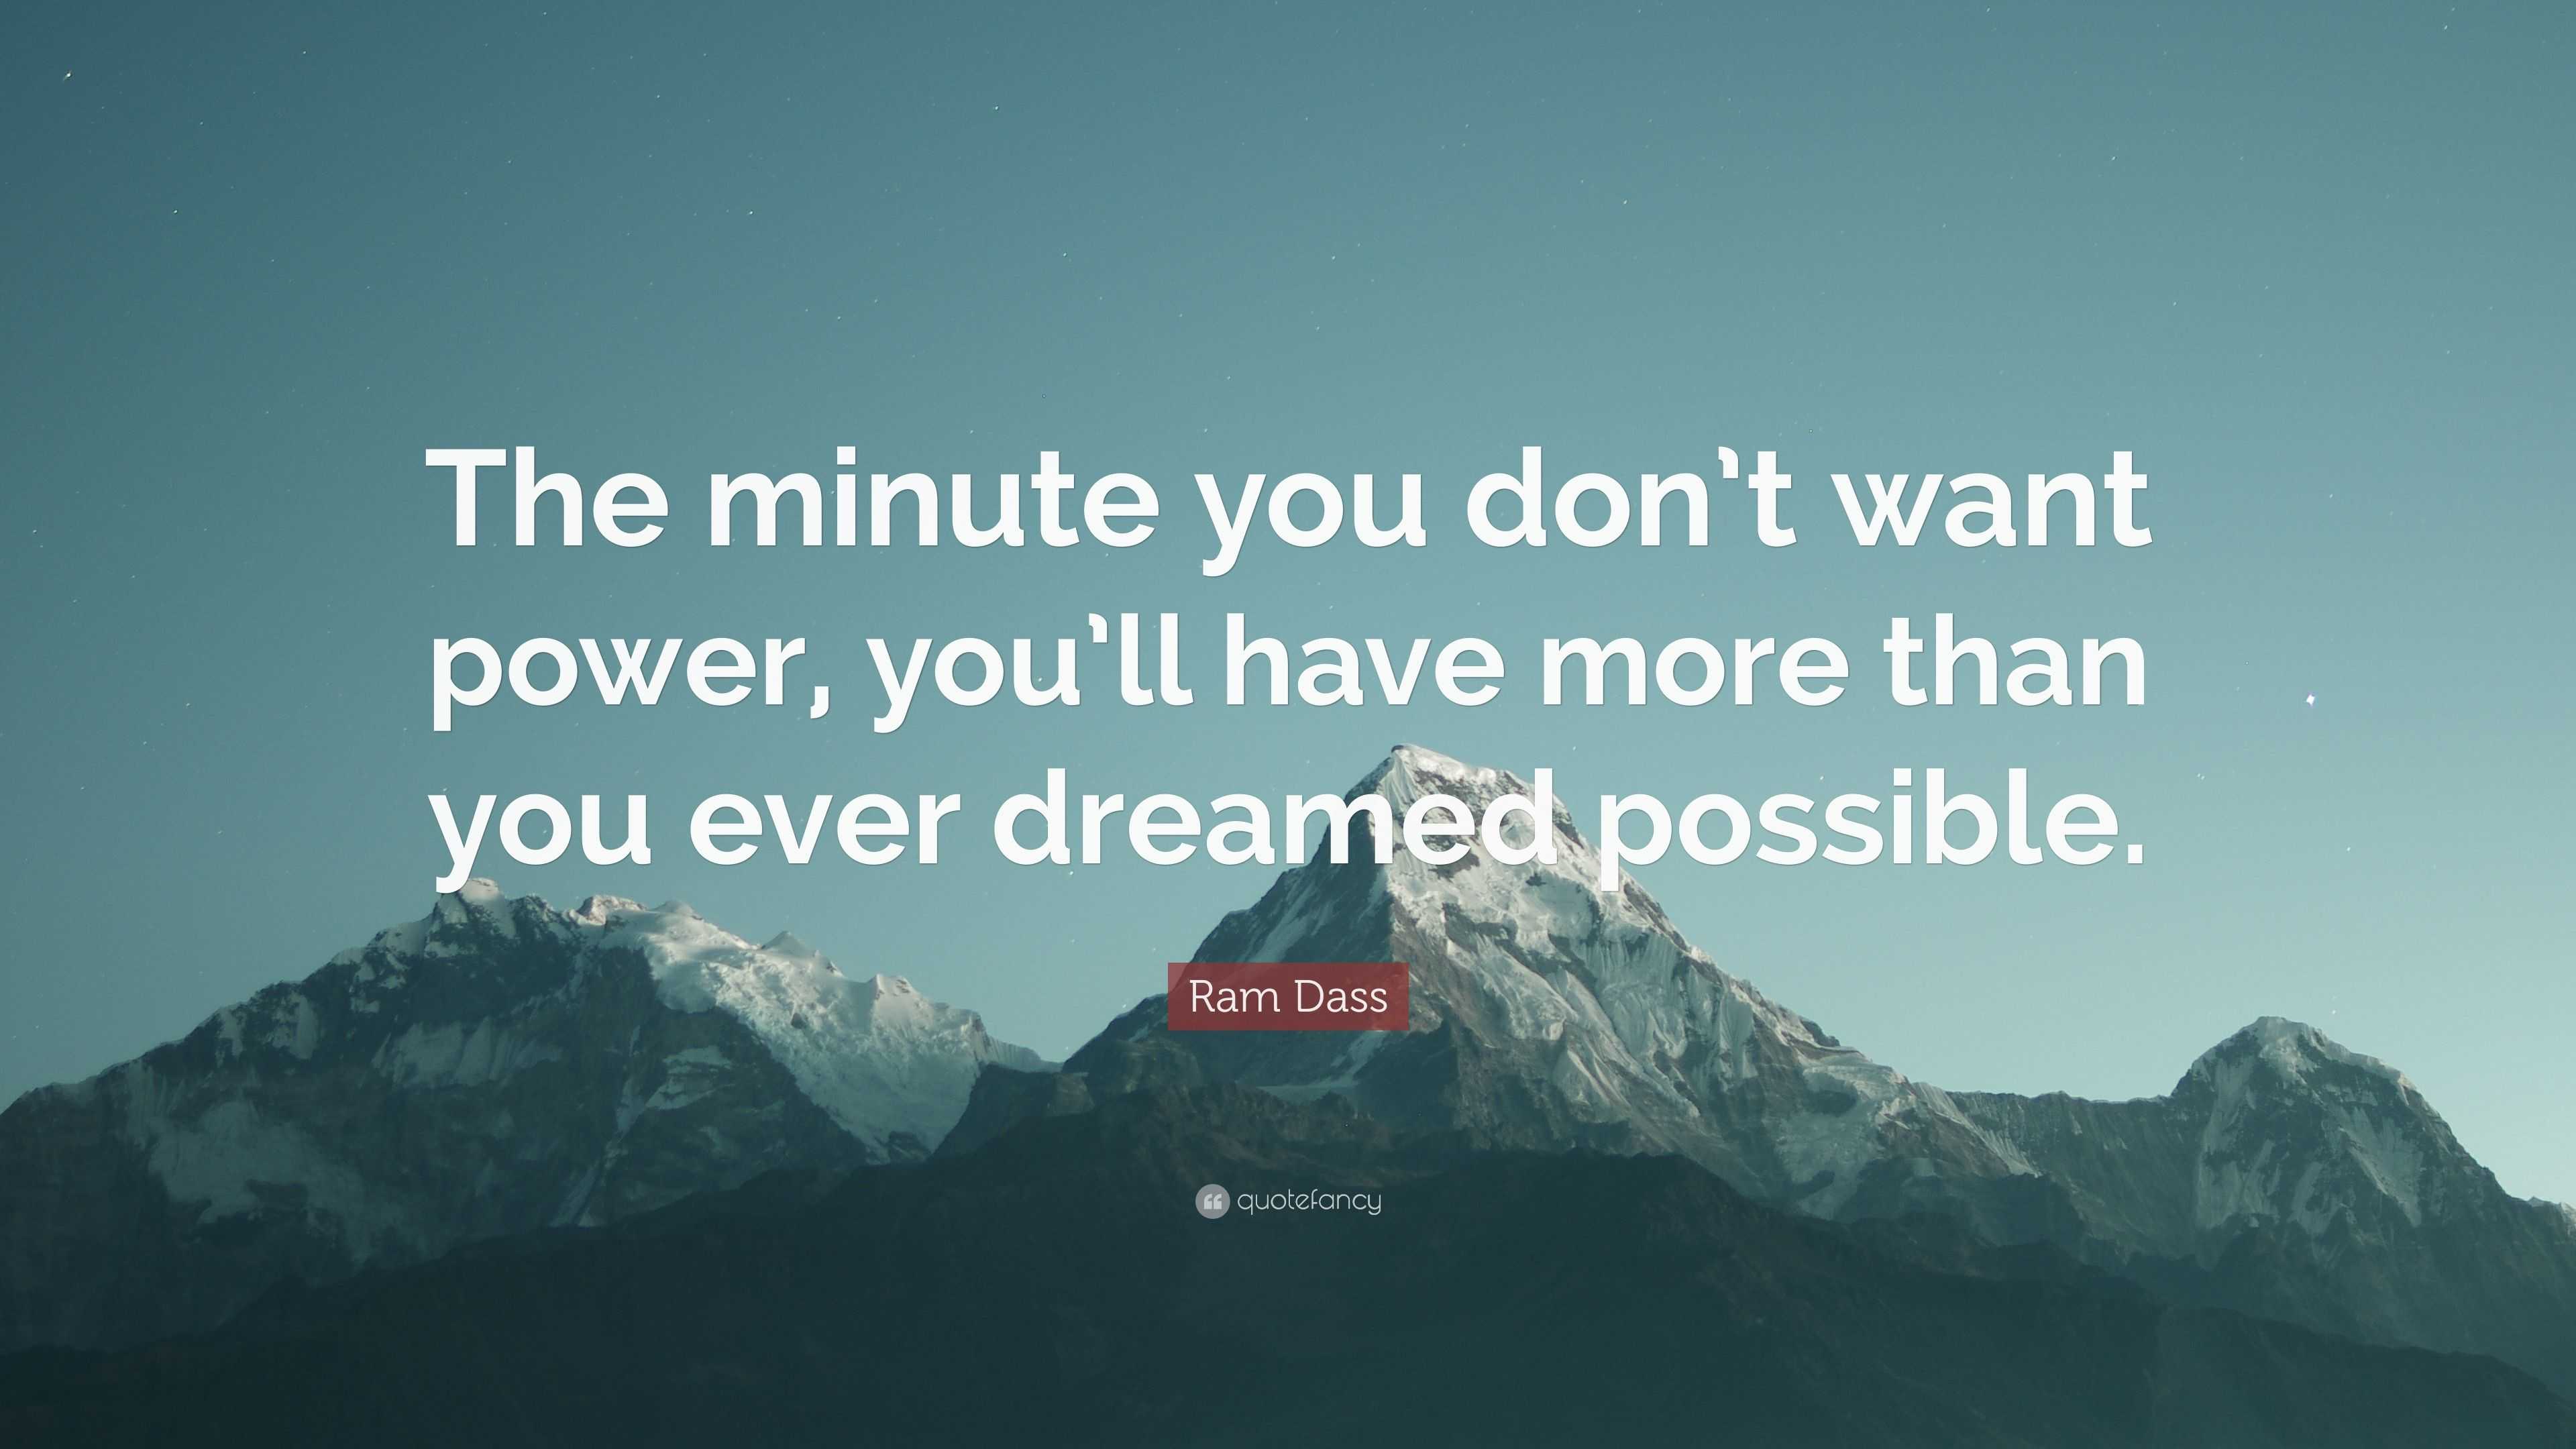 Ram Dass Quote: “The minute you don’t want power, you’ll have more than ...